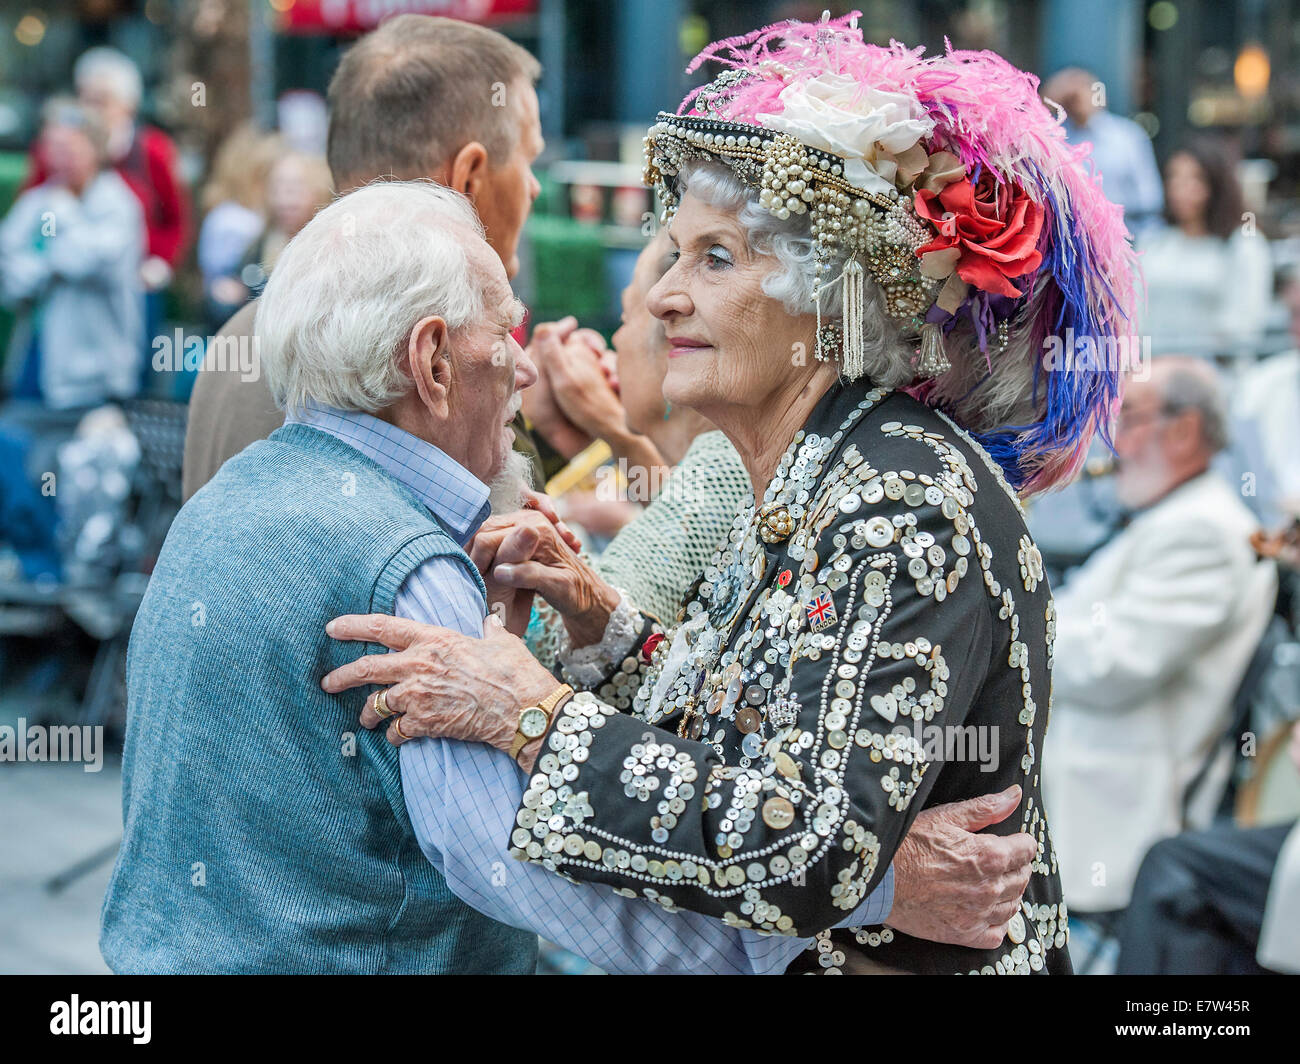 London, UK. 24th September, 2014. A Pearly Queen leads the last Spitalfields Tea Dance of 2014 - with music by the New Covent Garden Dance Orchestra. Spitalfields Market, London, UK 24 Sept 2014. Credit:  Guy Bell/Alamy Live News Stock Photo